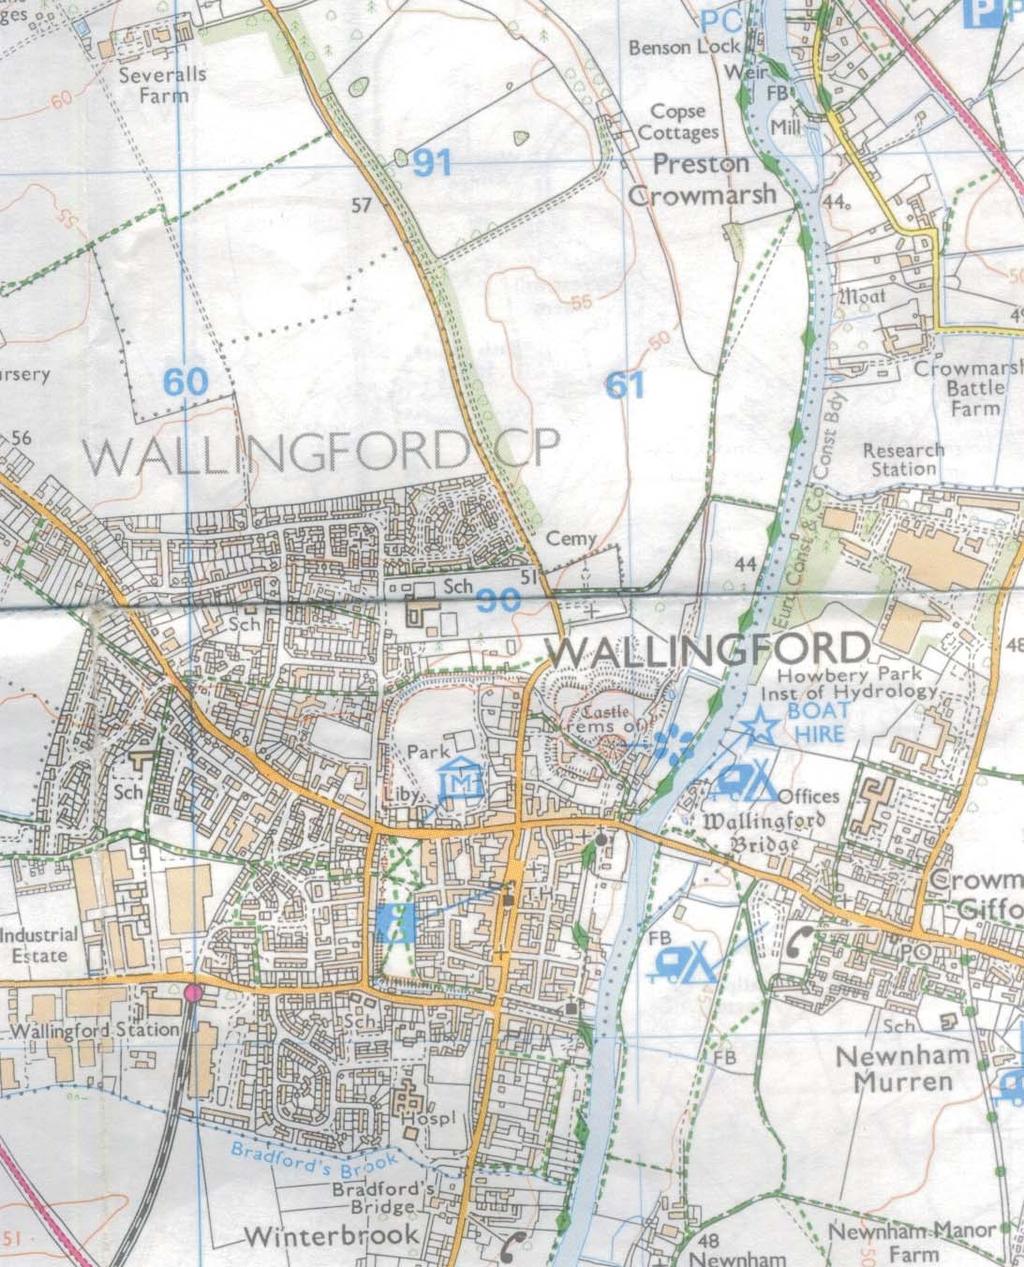 Banbury 91000 Bicester Witney Thame Abingdon OXFORD Wantage Didcot SITE Wallingford Henley-on -Thames 90000 89000 SITE SU60000 61000 Flood Compensation Area, Riverside Park, Wallingford,